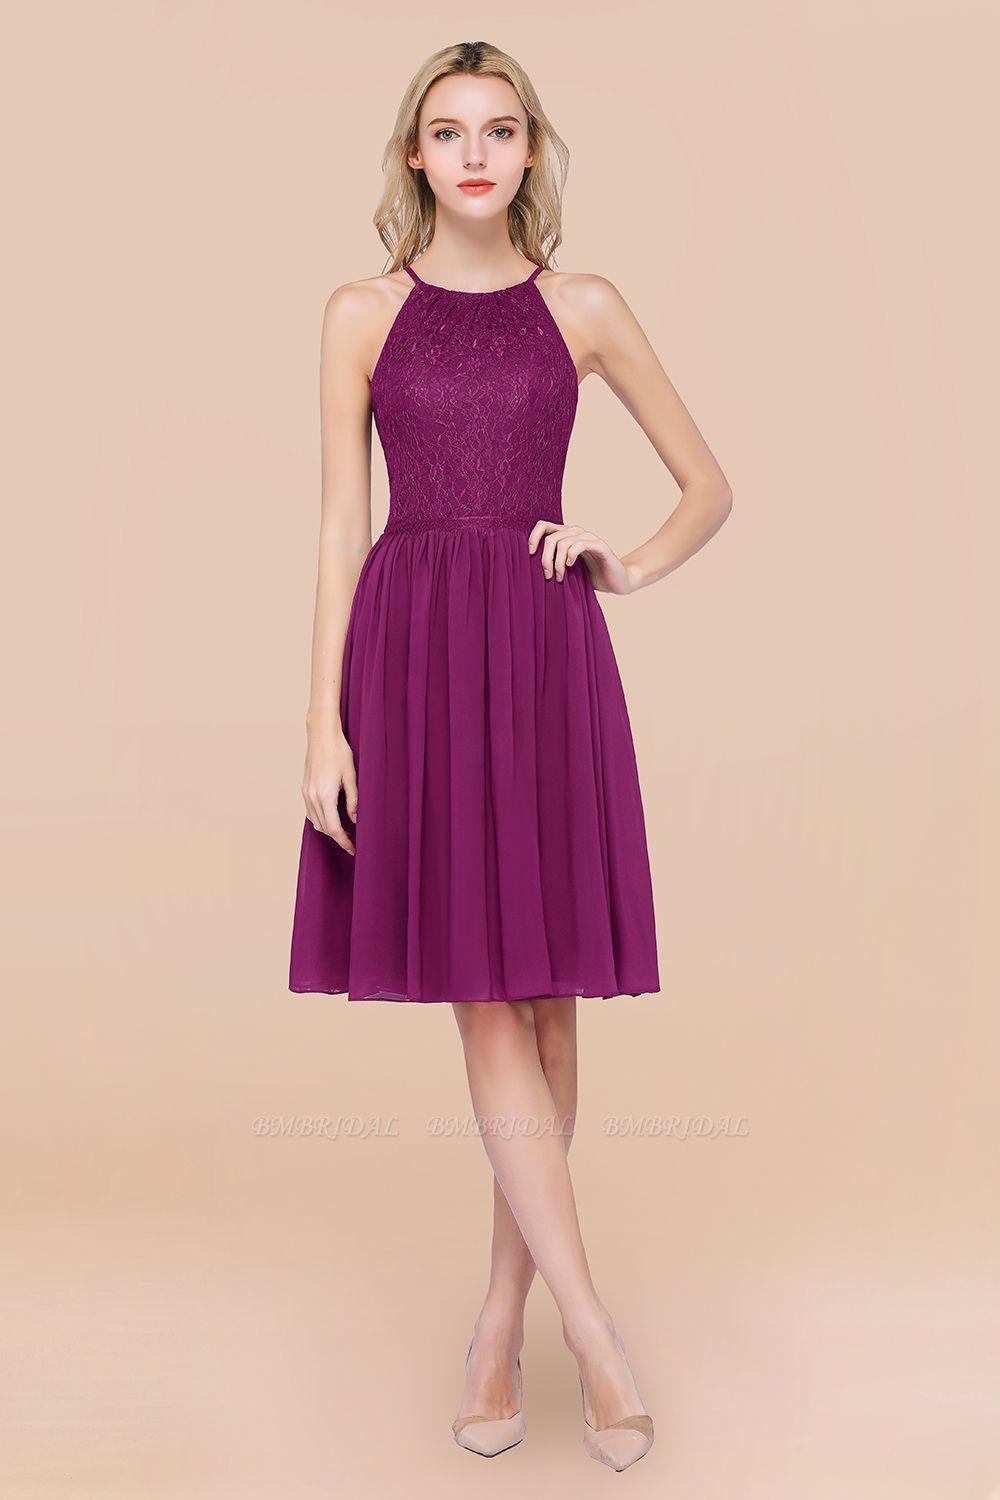 BMbridal Lovely Burgundy Lace Short Bridesmaid Dress With Spaghetti-Straps